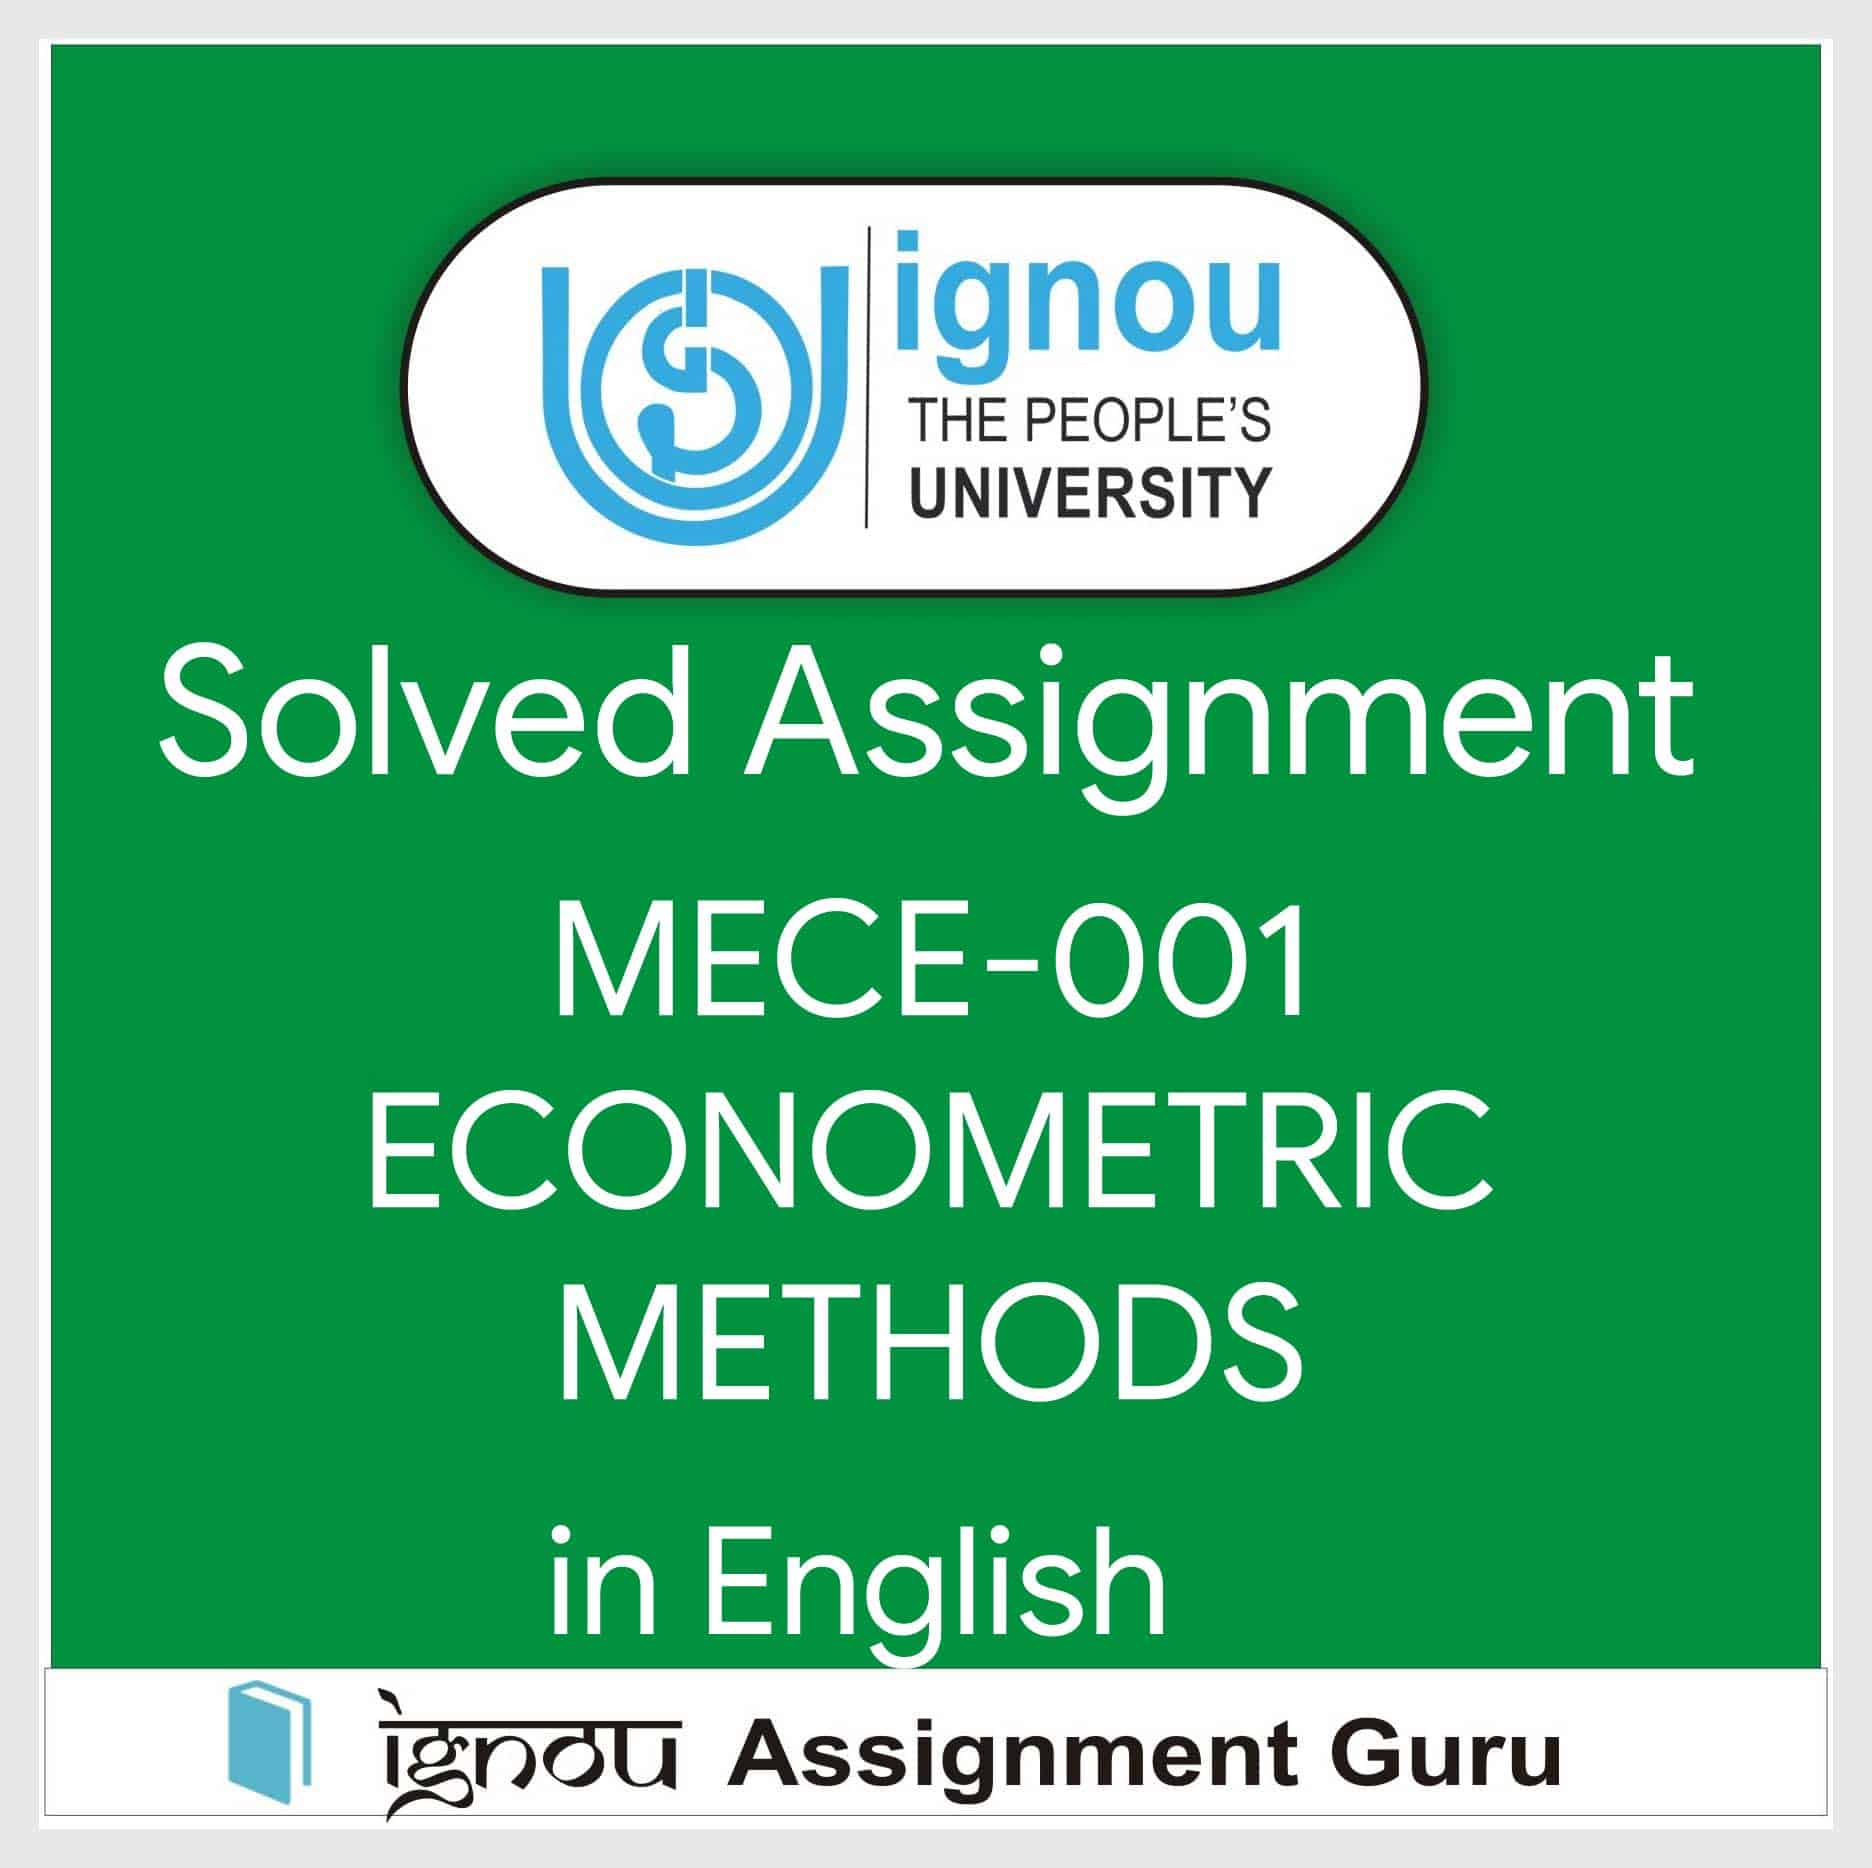 MECE-001 ECONOMETRIC METHODS in English Solved Assignment 2022-2023